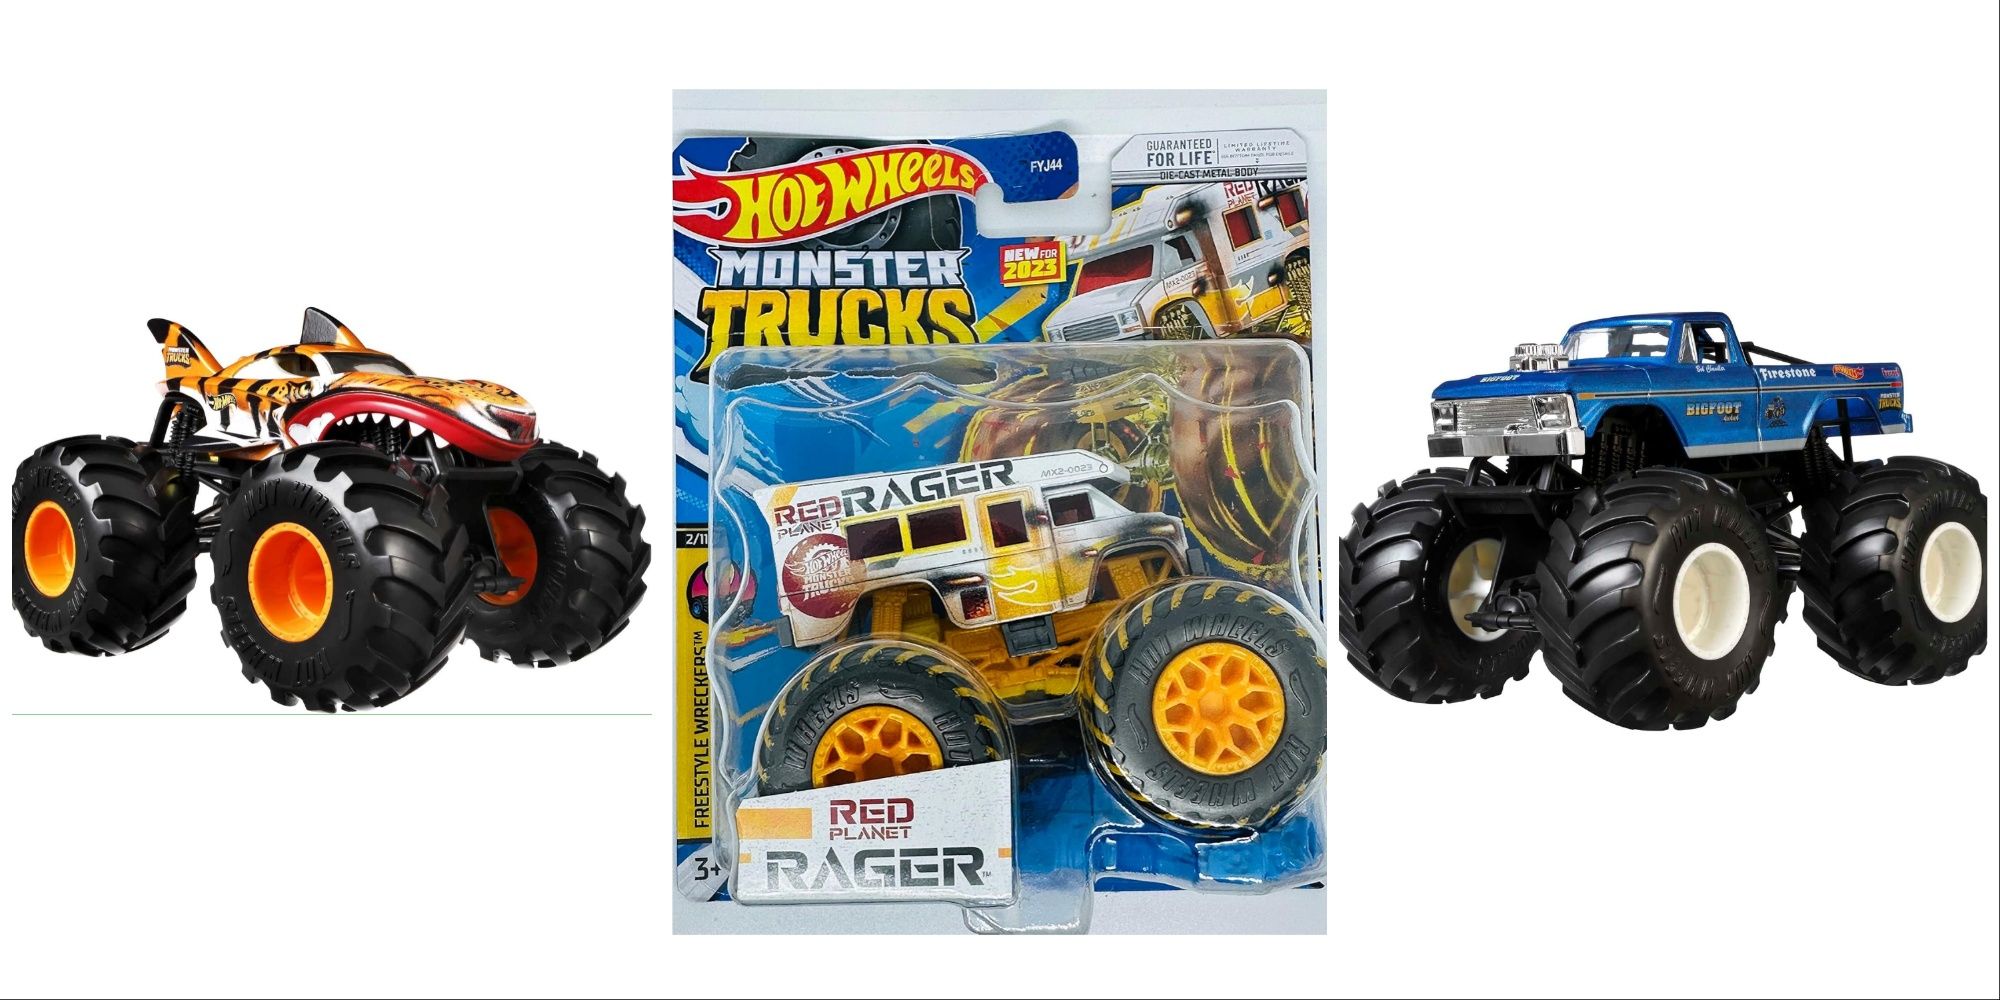 Three monster truck Hot Wheels models arranged in a row. Tiger Shark is on the left, with Red Rager in the center still in its box, and Bigfoot on the right.